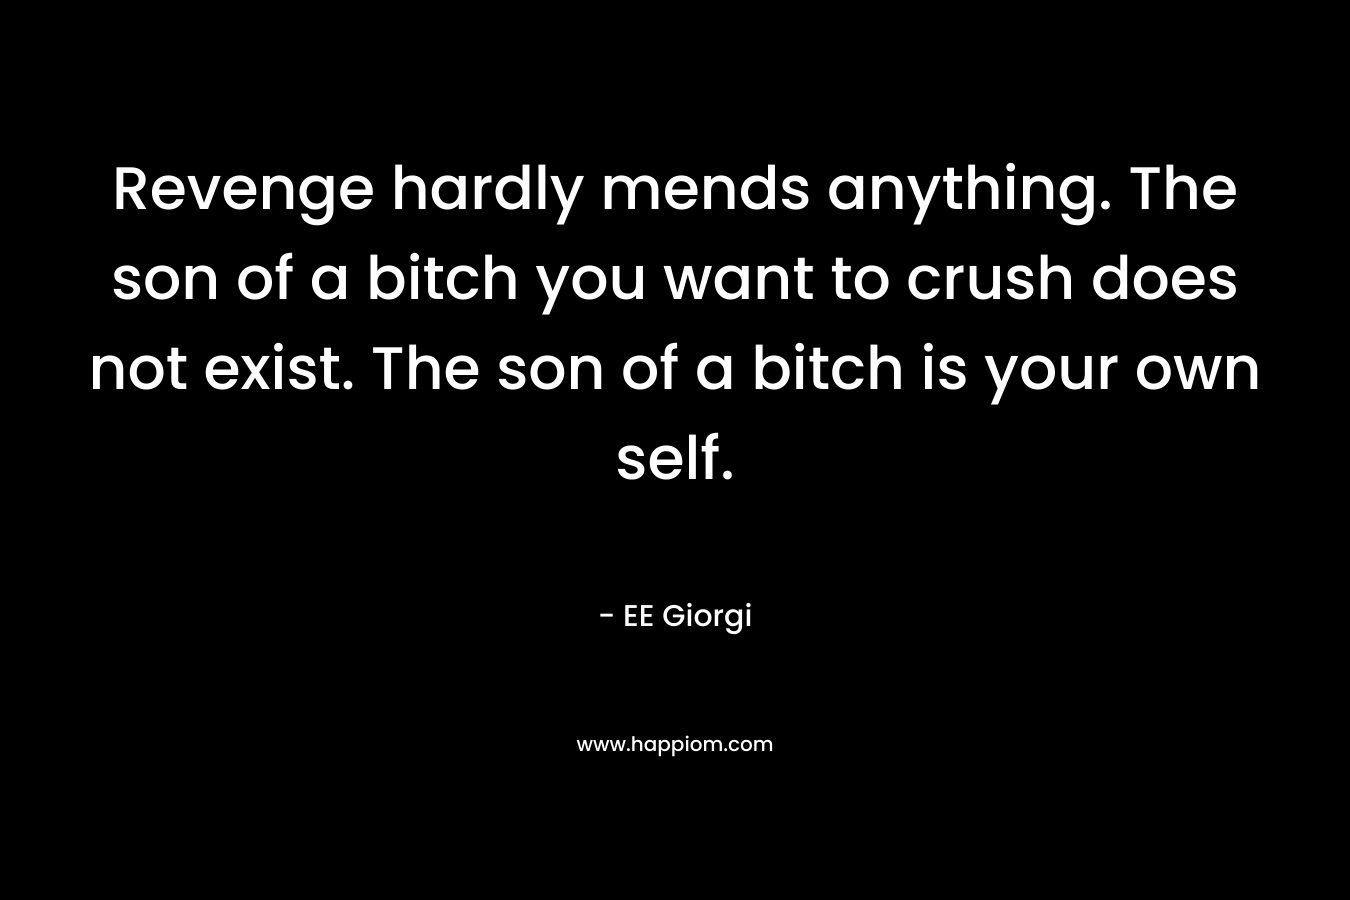 Revenge hardly mends anything. The son of a bitch you want to crush does not exist. The son of a bitch is your own self. – EE Giorgi